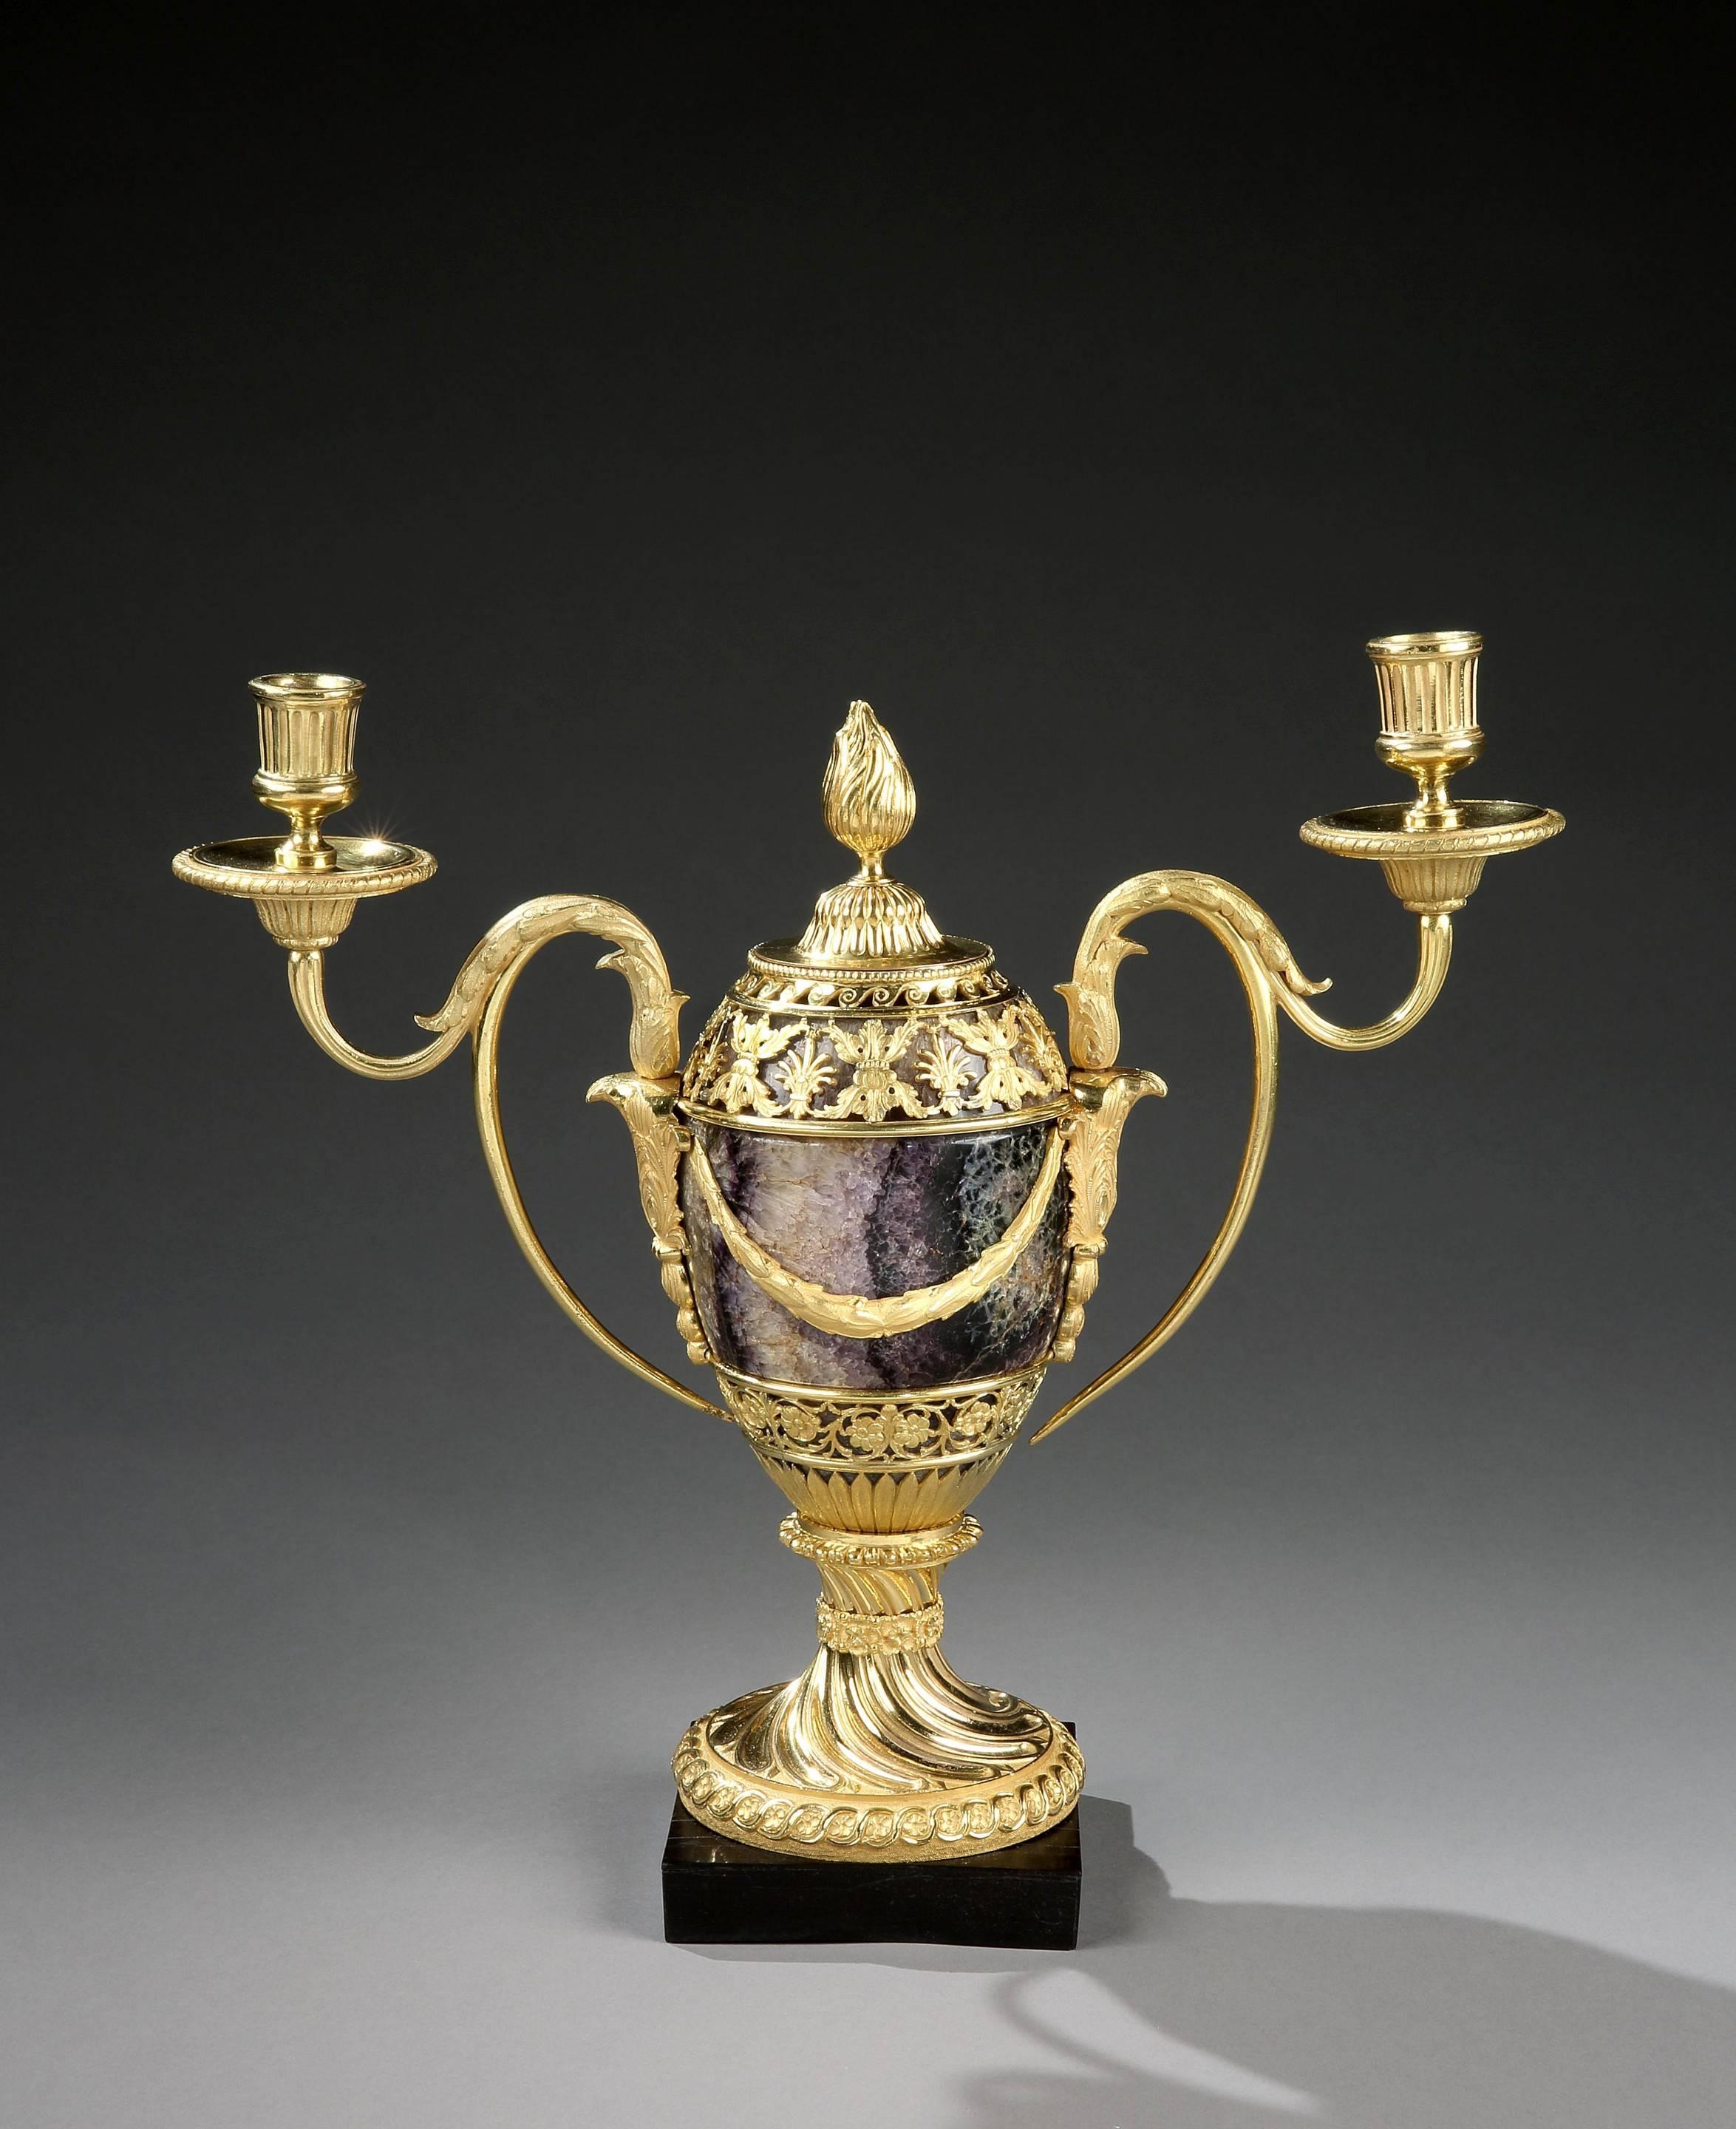 Matthew Boulton produced various models of candle vases in different sizes; this is one of the largest. The candle arms are unusual for this model and to date this is the only pair known pair with this type of arm. The usual version is the scroll